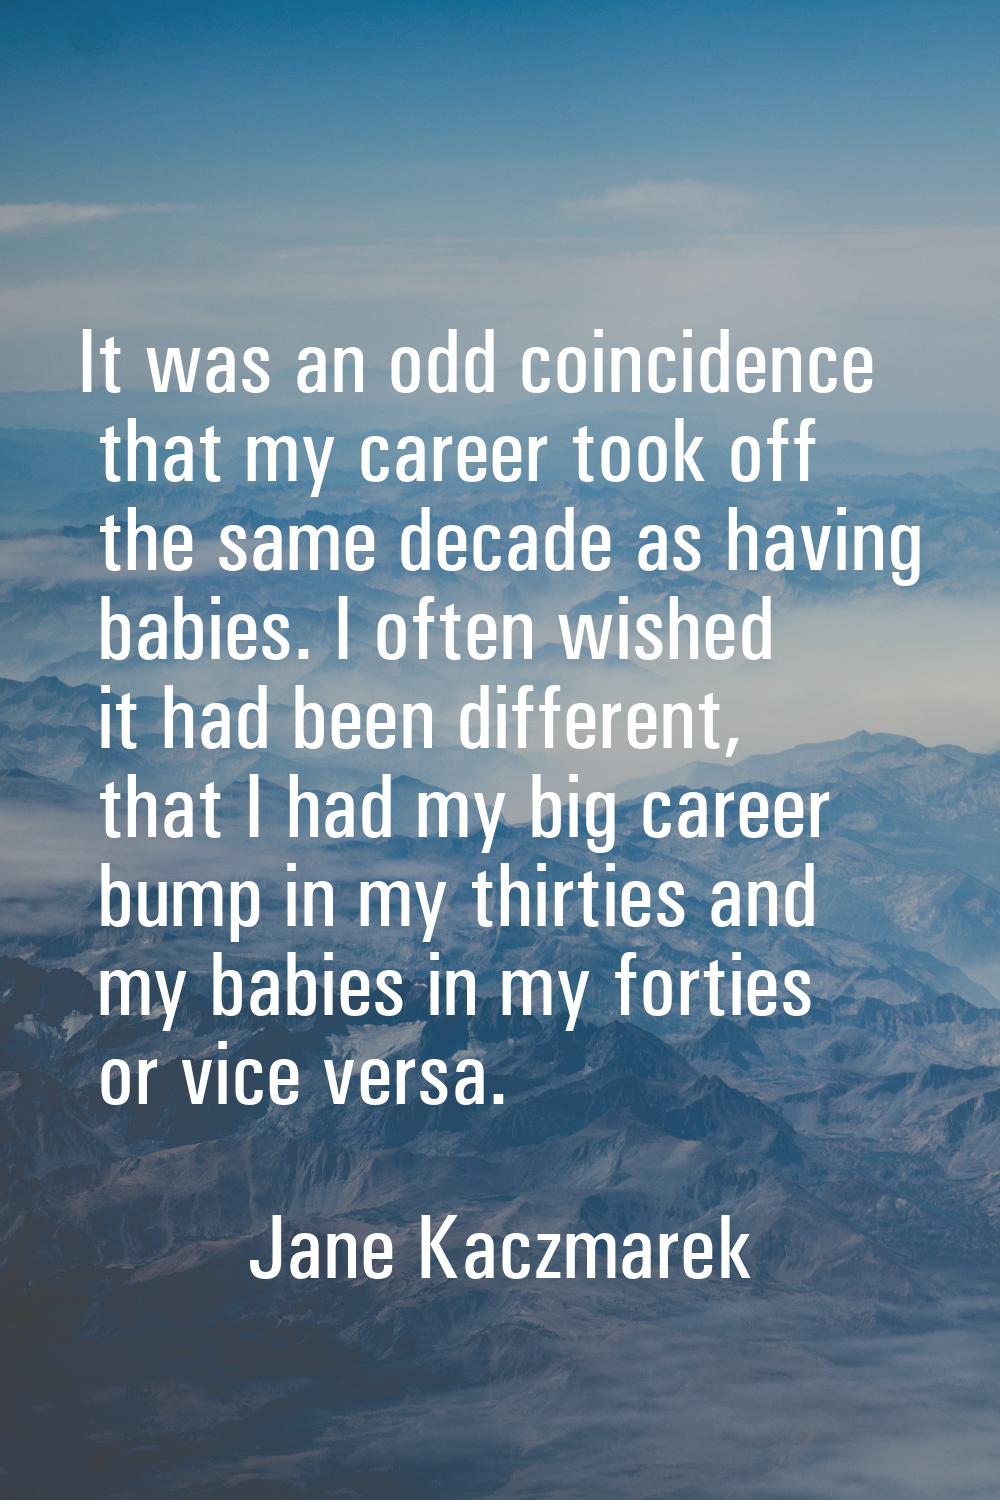 It was an odd coincidence that my career took off the same decade as having babies. I often wished 